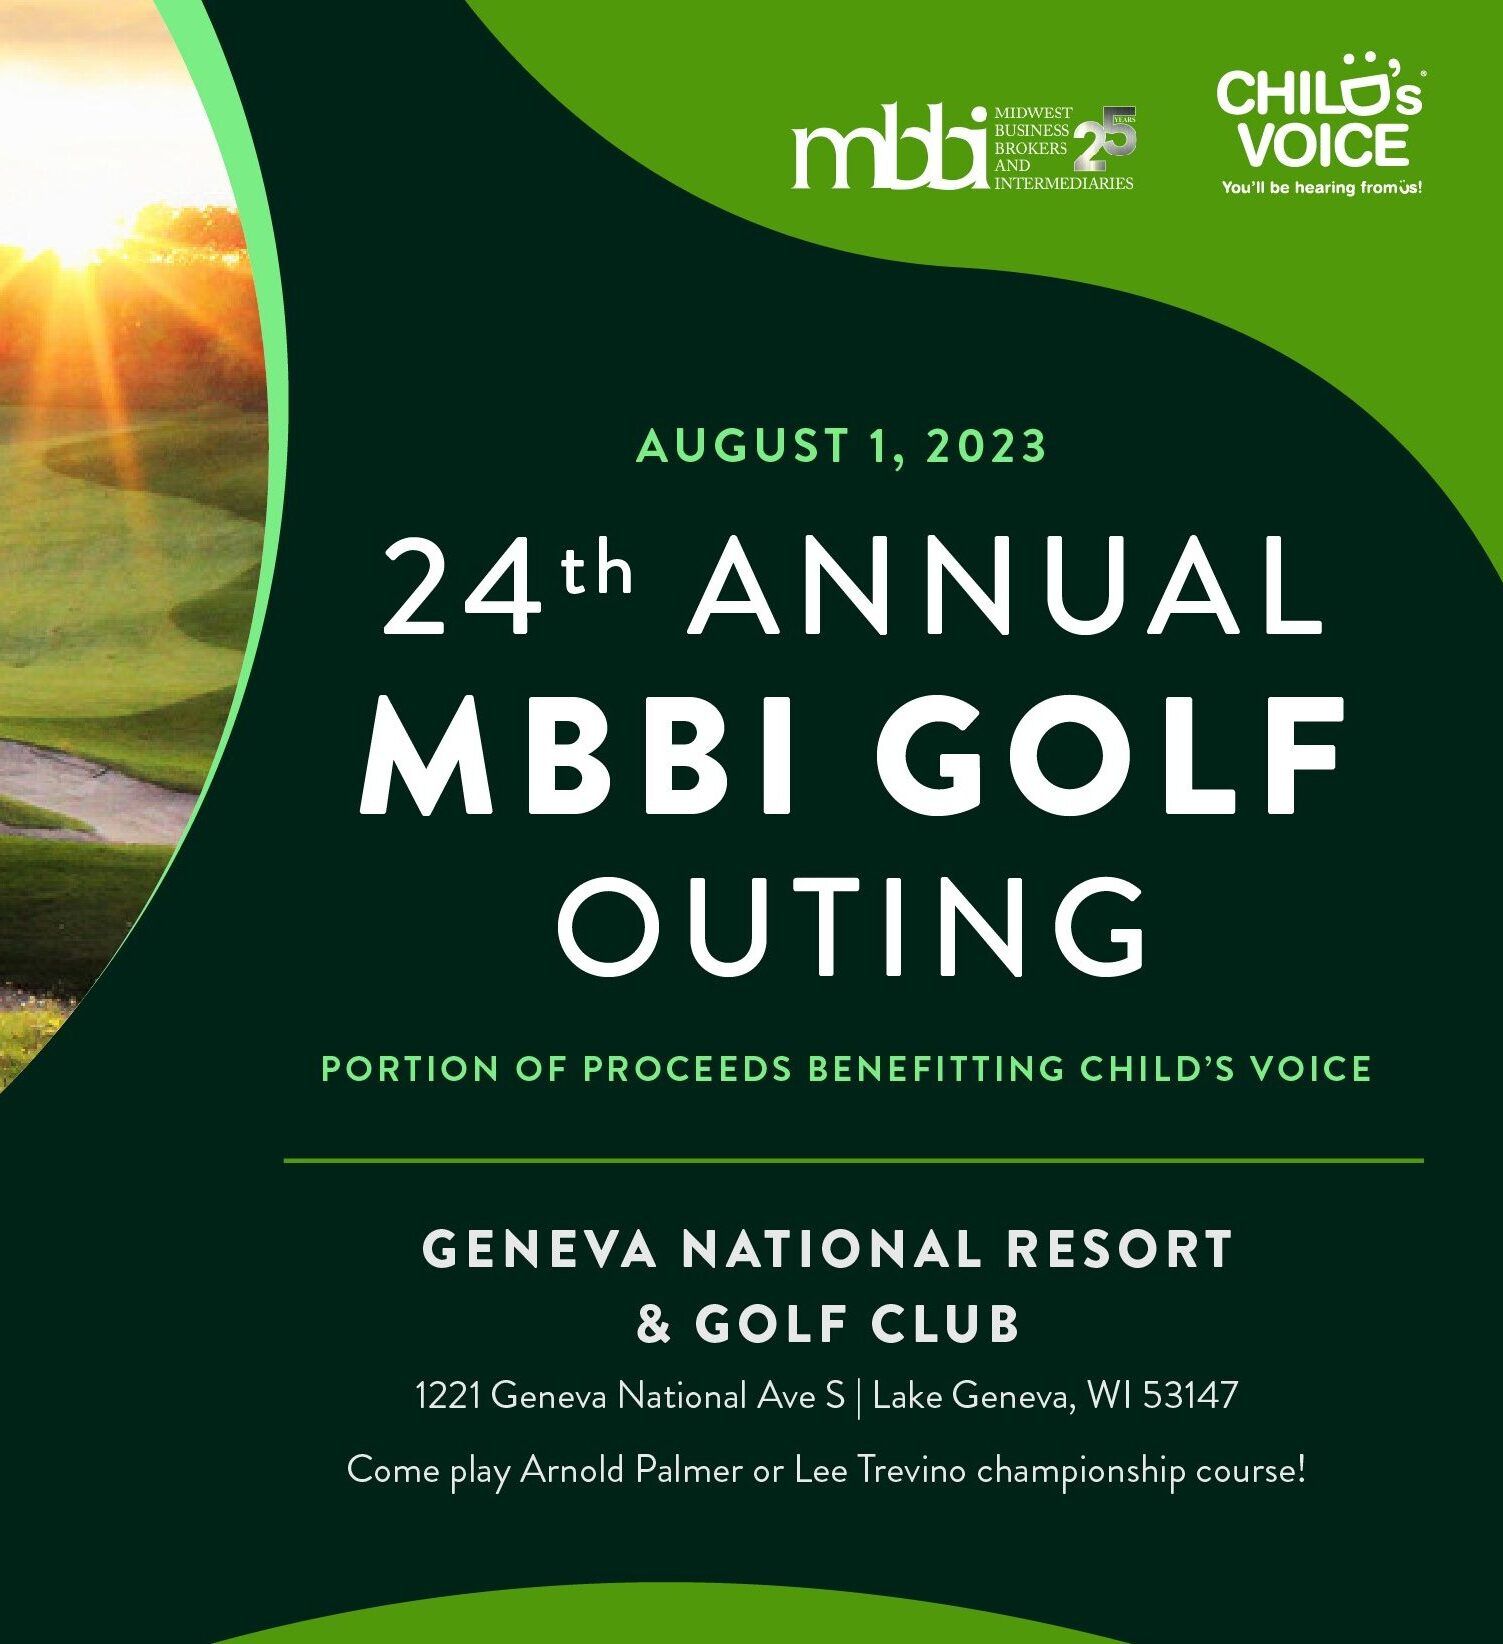 The Midwest Brokers and Business Intermediaries invite you to their 24th Annual Golf Outing, with proceeds benefitting Child's Voice.